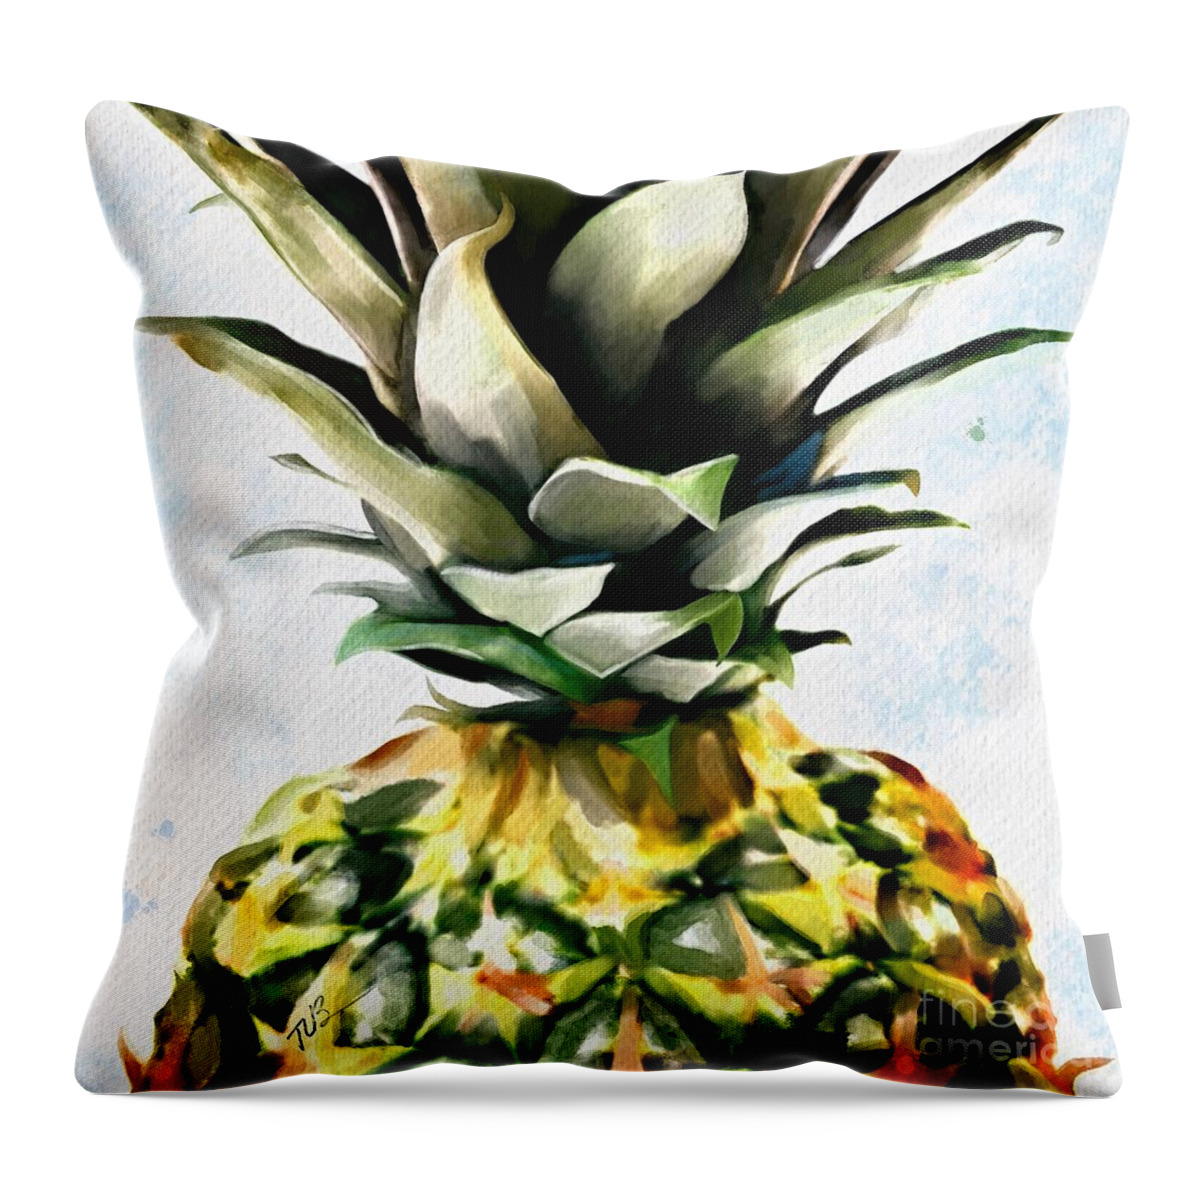 Pineapple Throw Pillow featuring the painting Pineapple Dreams by Tammy Lee Bradley